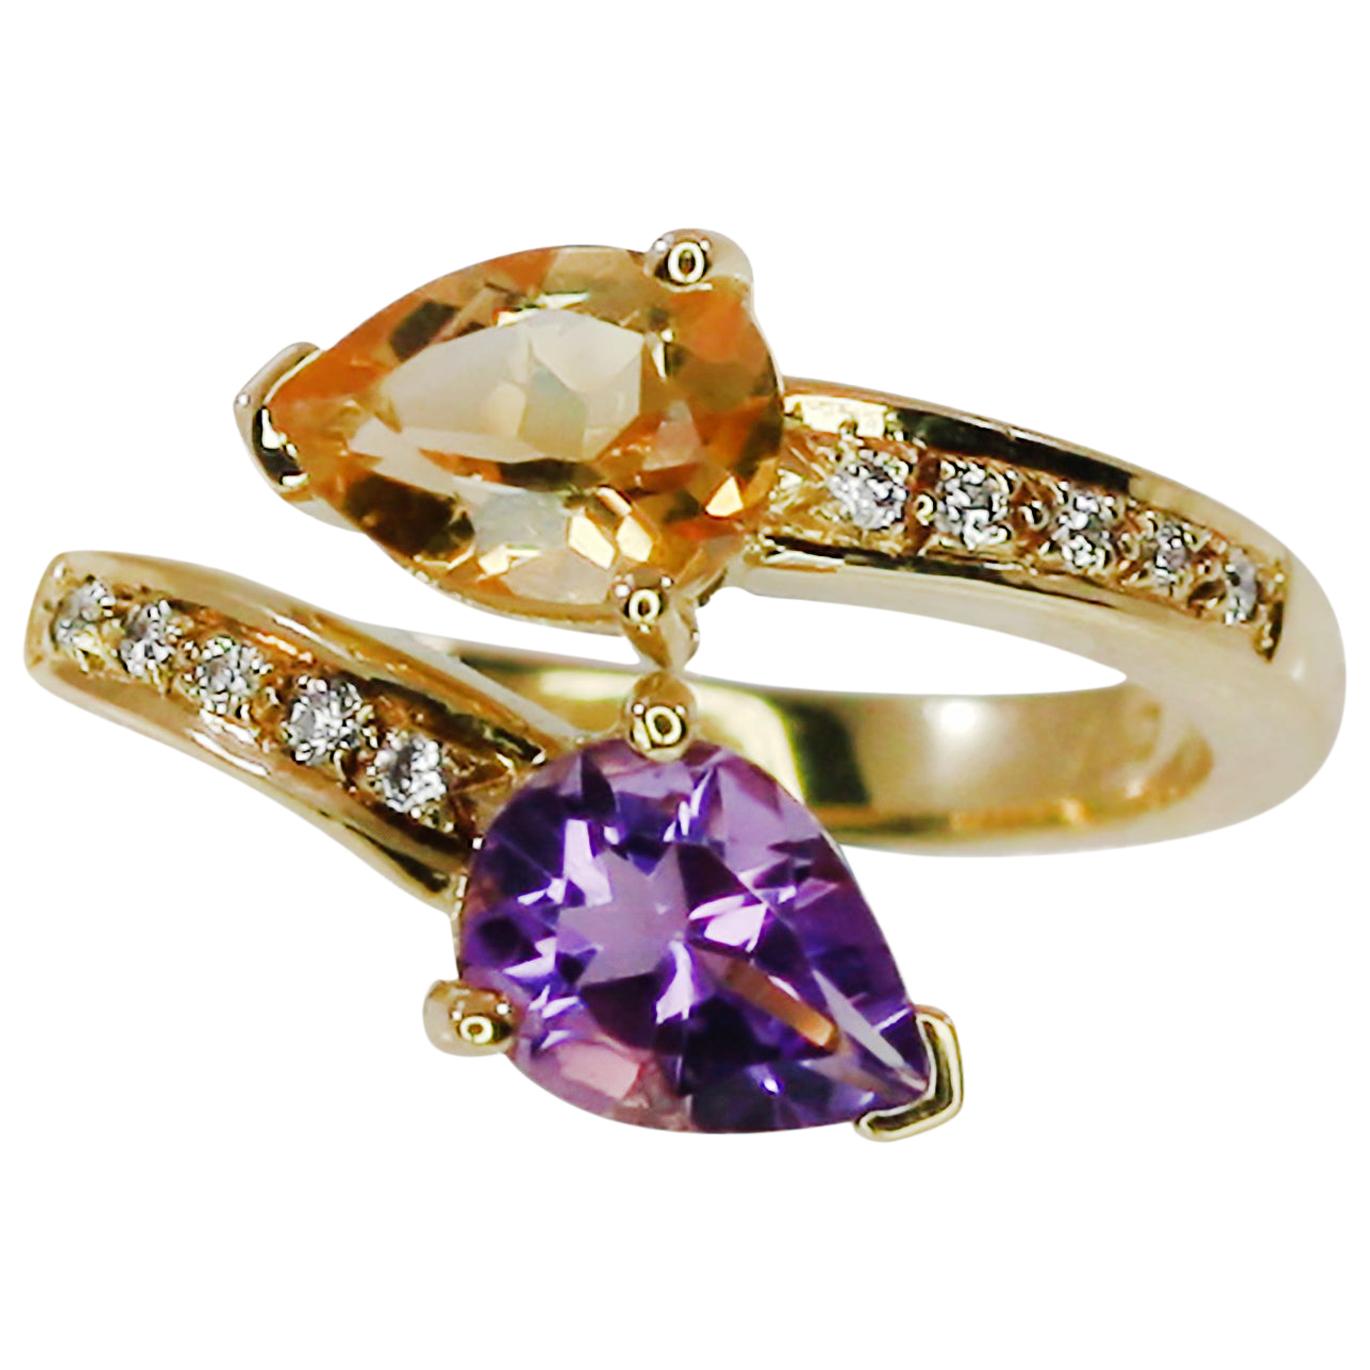 Georgios Collections 18 Karat Yellow Gold Amethyst and Citrine Diamond Band Ring